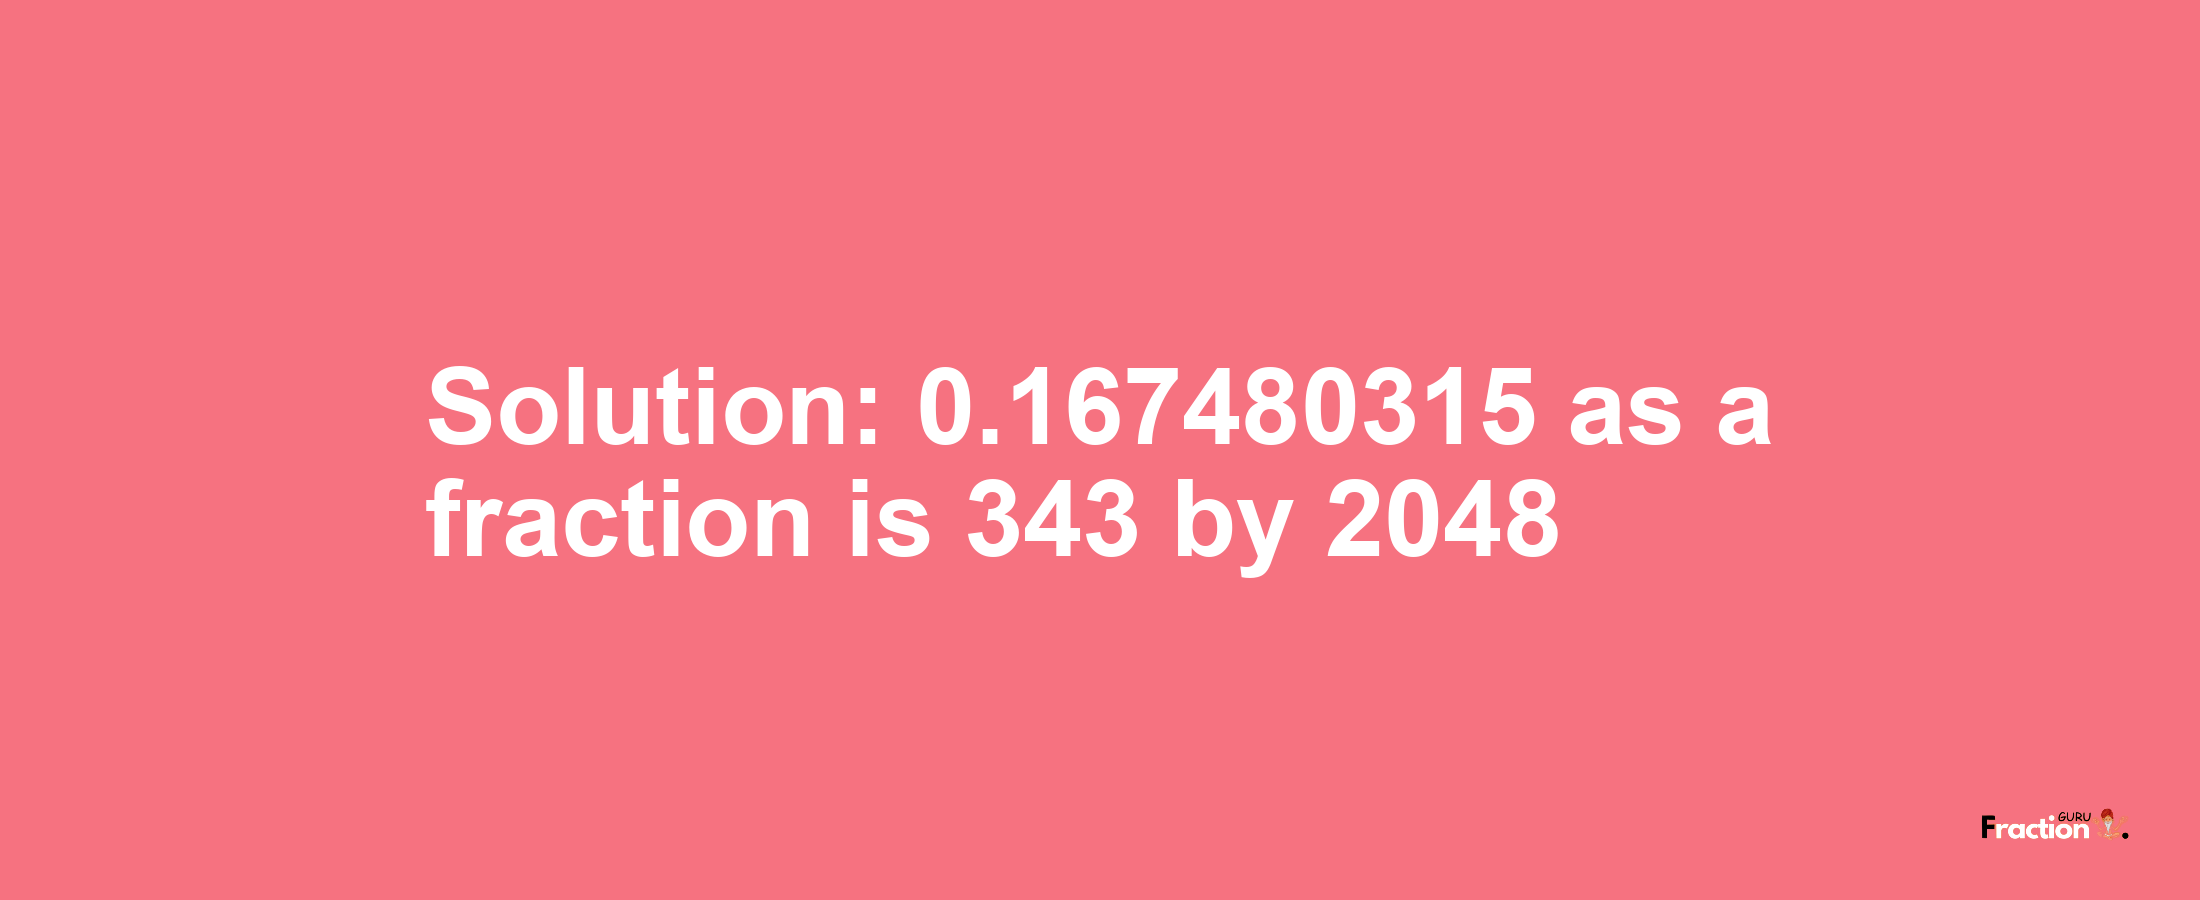 Solution:0.167480315 as a fraction is 343/2048